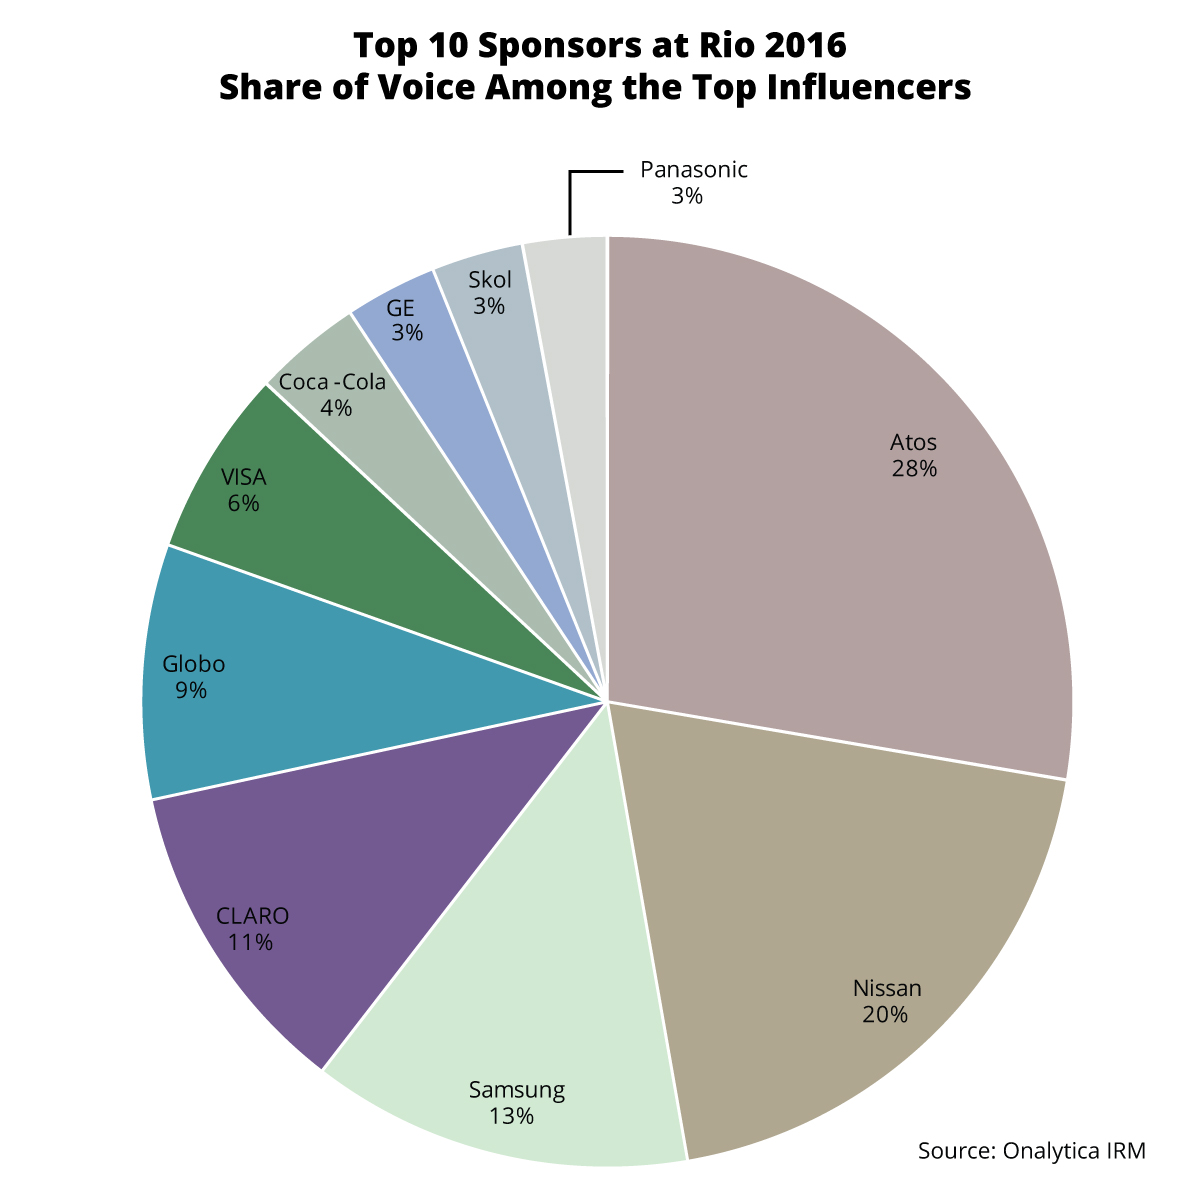 Sponsors at the Rio 2016 Olympics: Top 100 Influencers and Brands - Topic Share of Voice